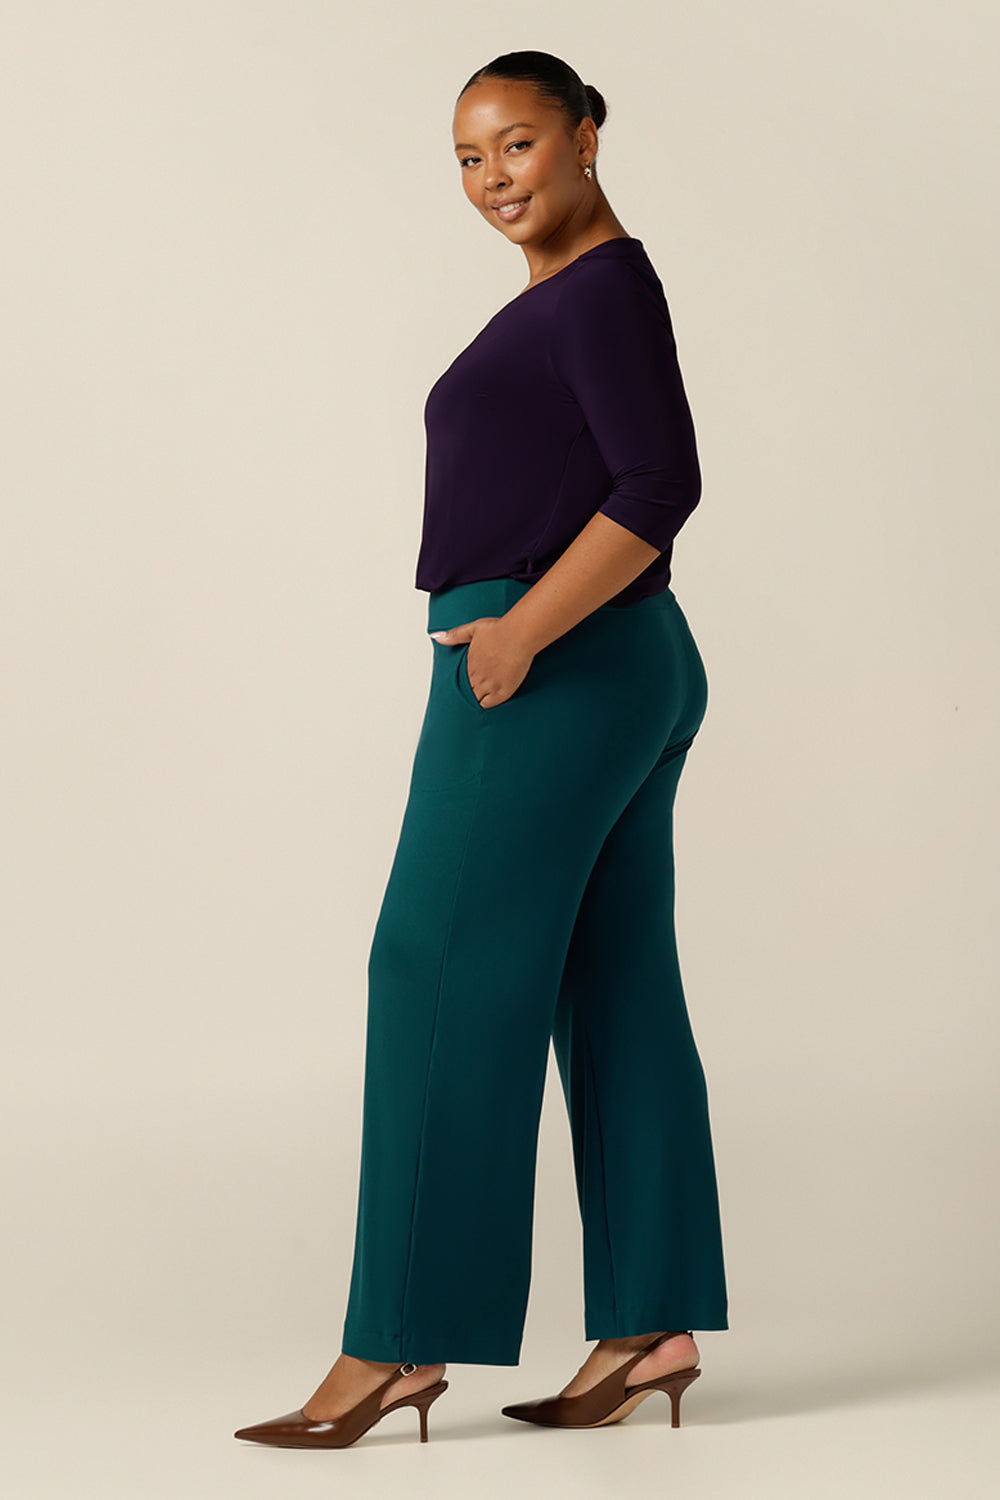 a size 18 curvy woman wears a wide-leg, pull-on pant in Petrol green jersey. A full length length, straight cut wide trouser, this stretch pant is worn with a long sleeve purple top and heels for a corporate wear look. 